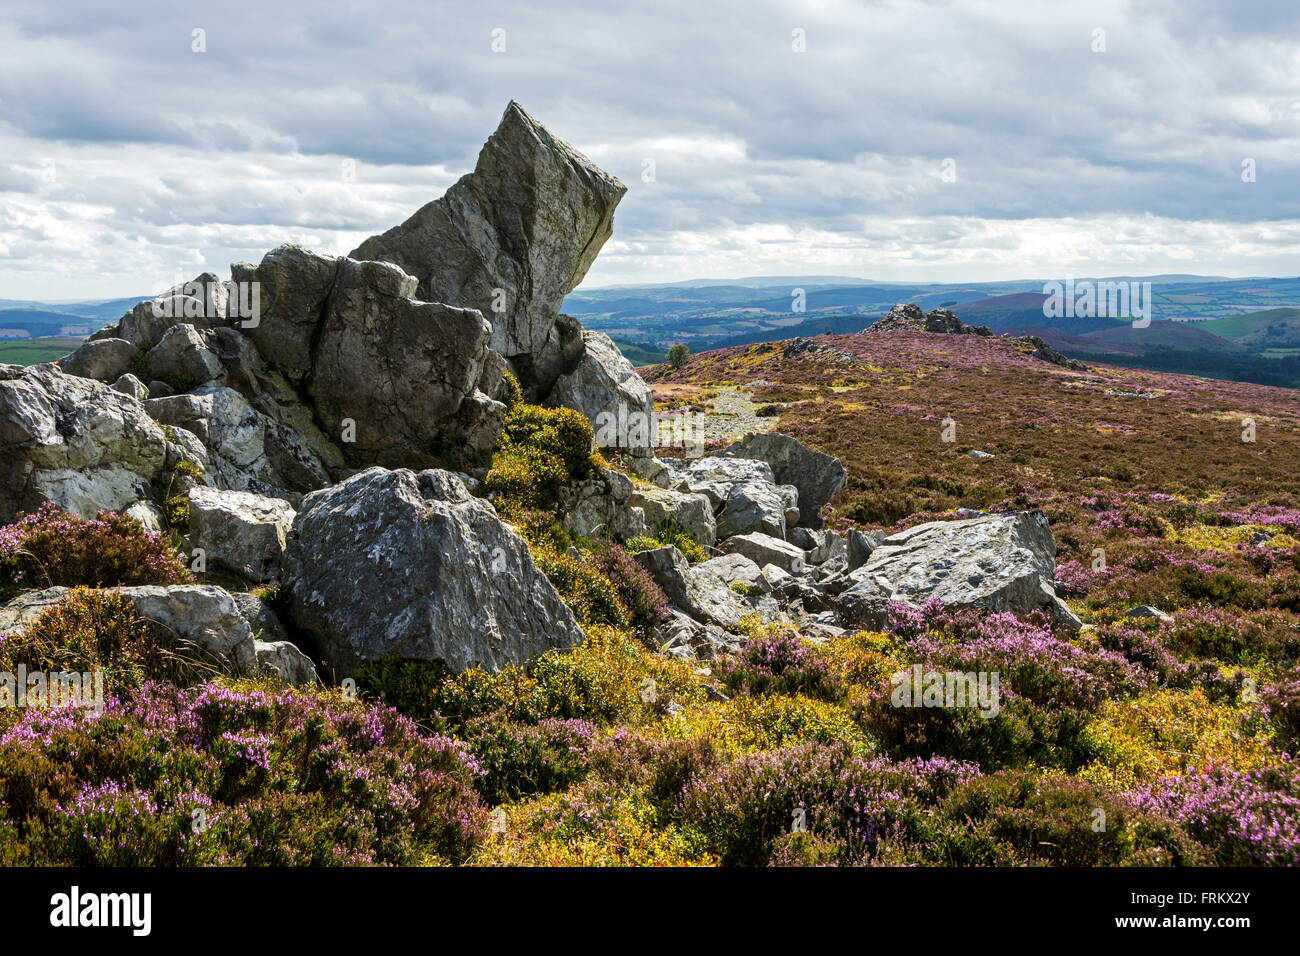 Cranberry Rock (in the middle distance on right) from near Manstone Rock on the Stiperstones Ridge, Shropshire, England, UK. Stock Photo